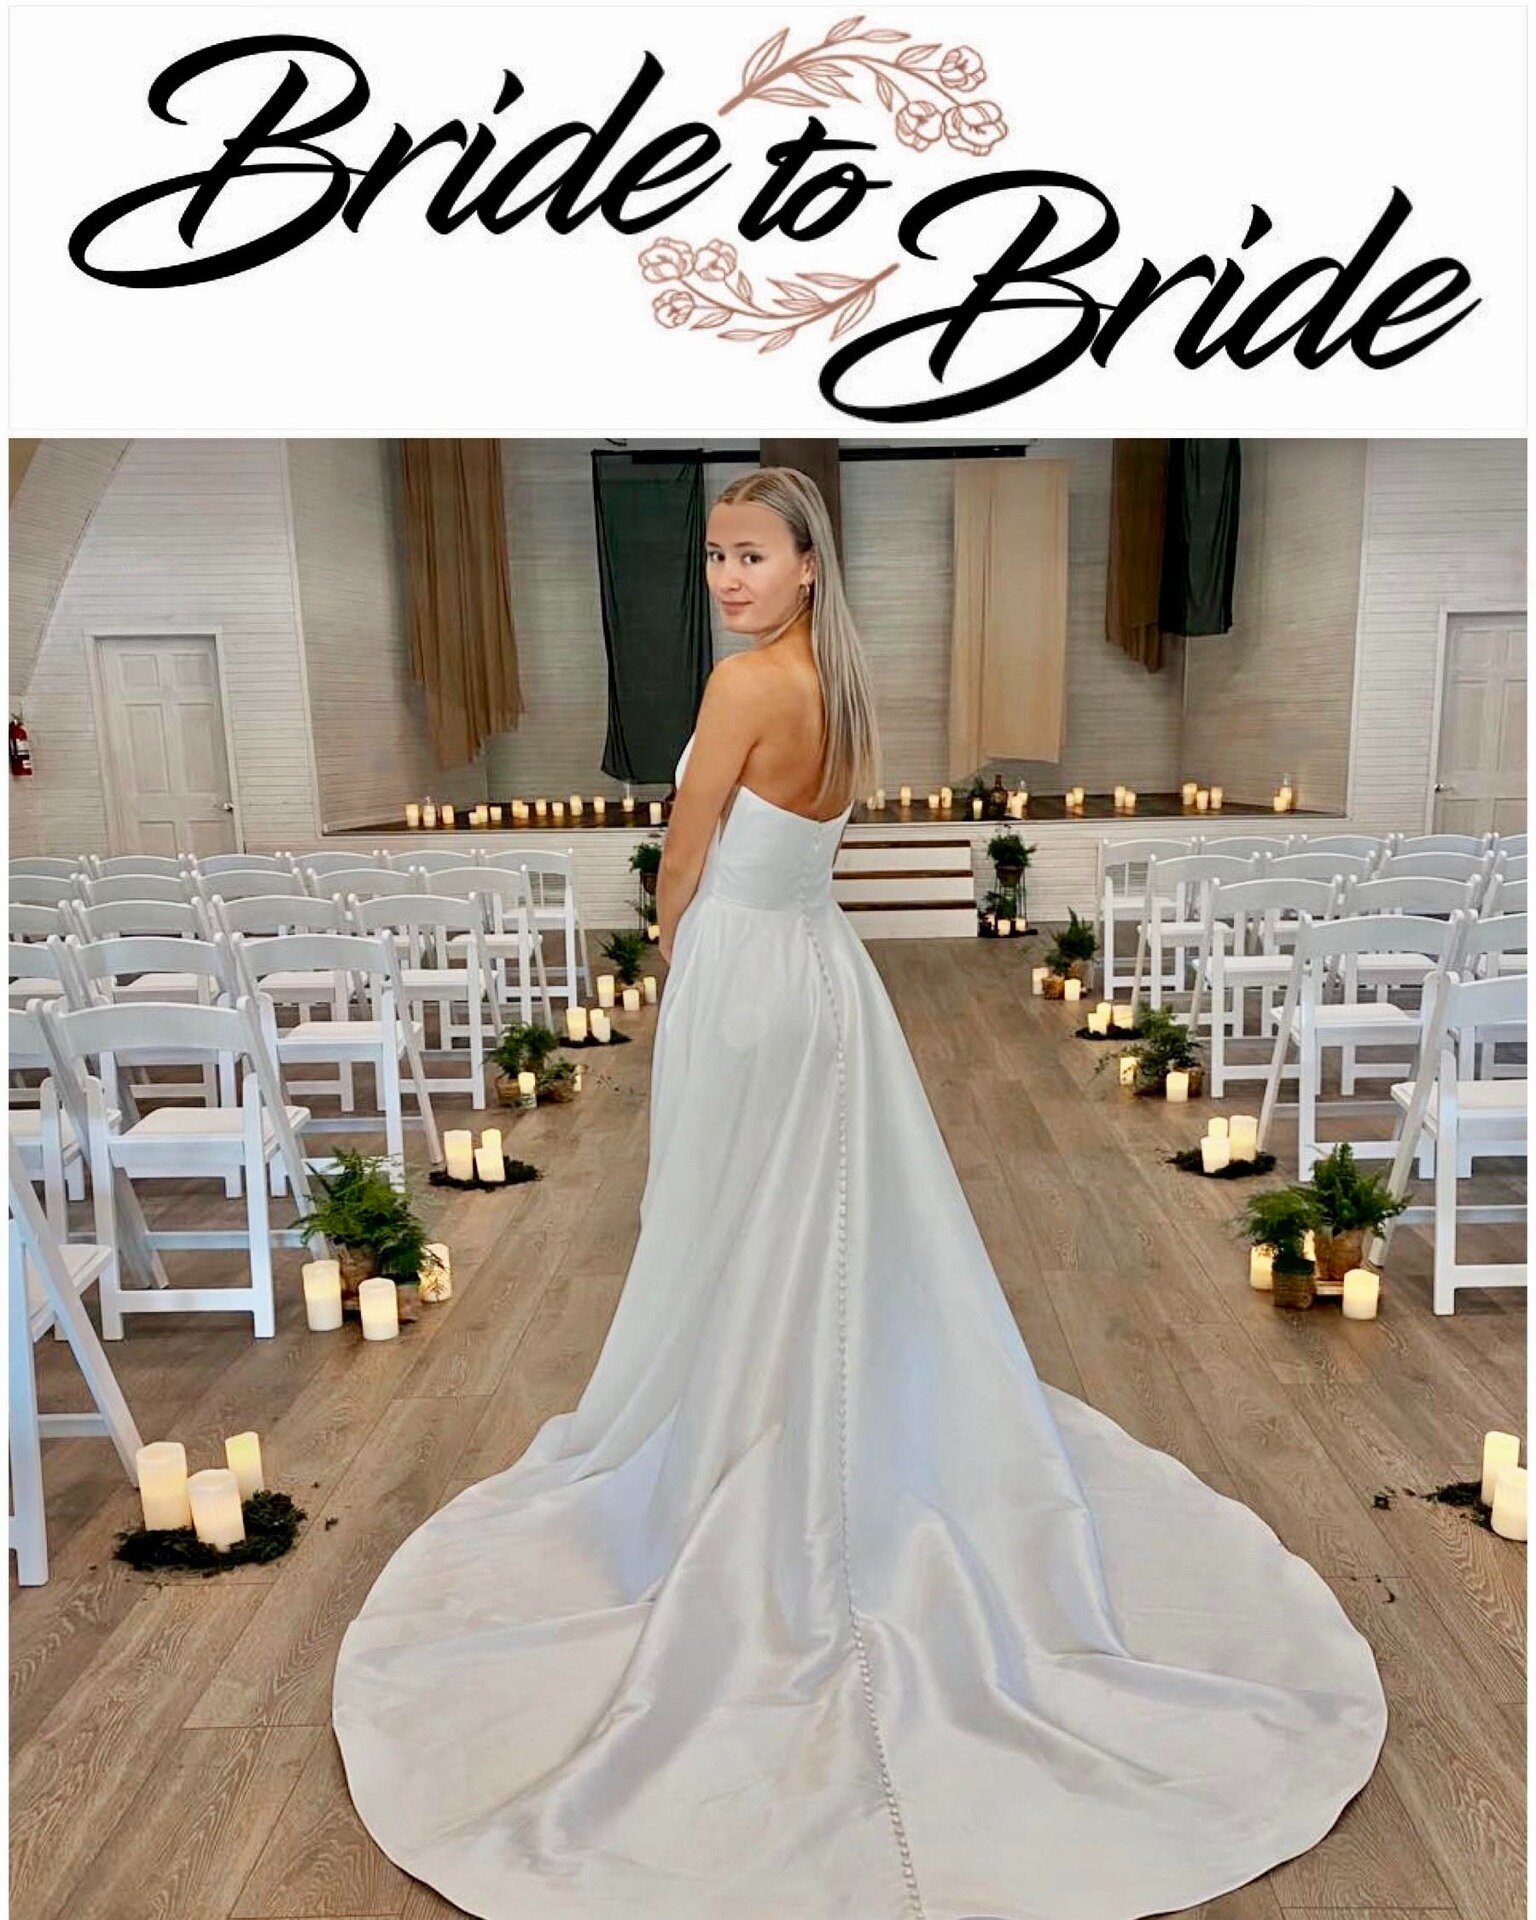 Brides 👰&hellip; Come visit with @bridetobride.co  and visit with over 150+ booths to discuss your wedding at the LARGEST and MOST ATTENDED #1 Sioux Falls bridal show at the Sioux Empire Wedding Showcase and Fashion Show on February 18th from 12-3pm